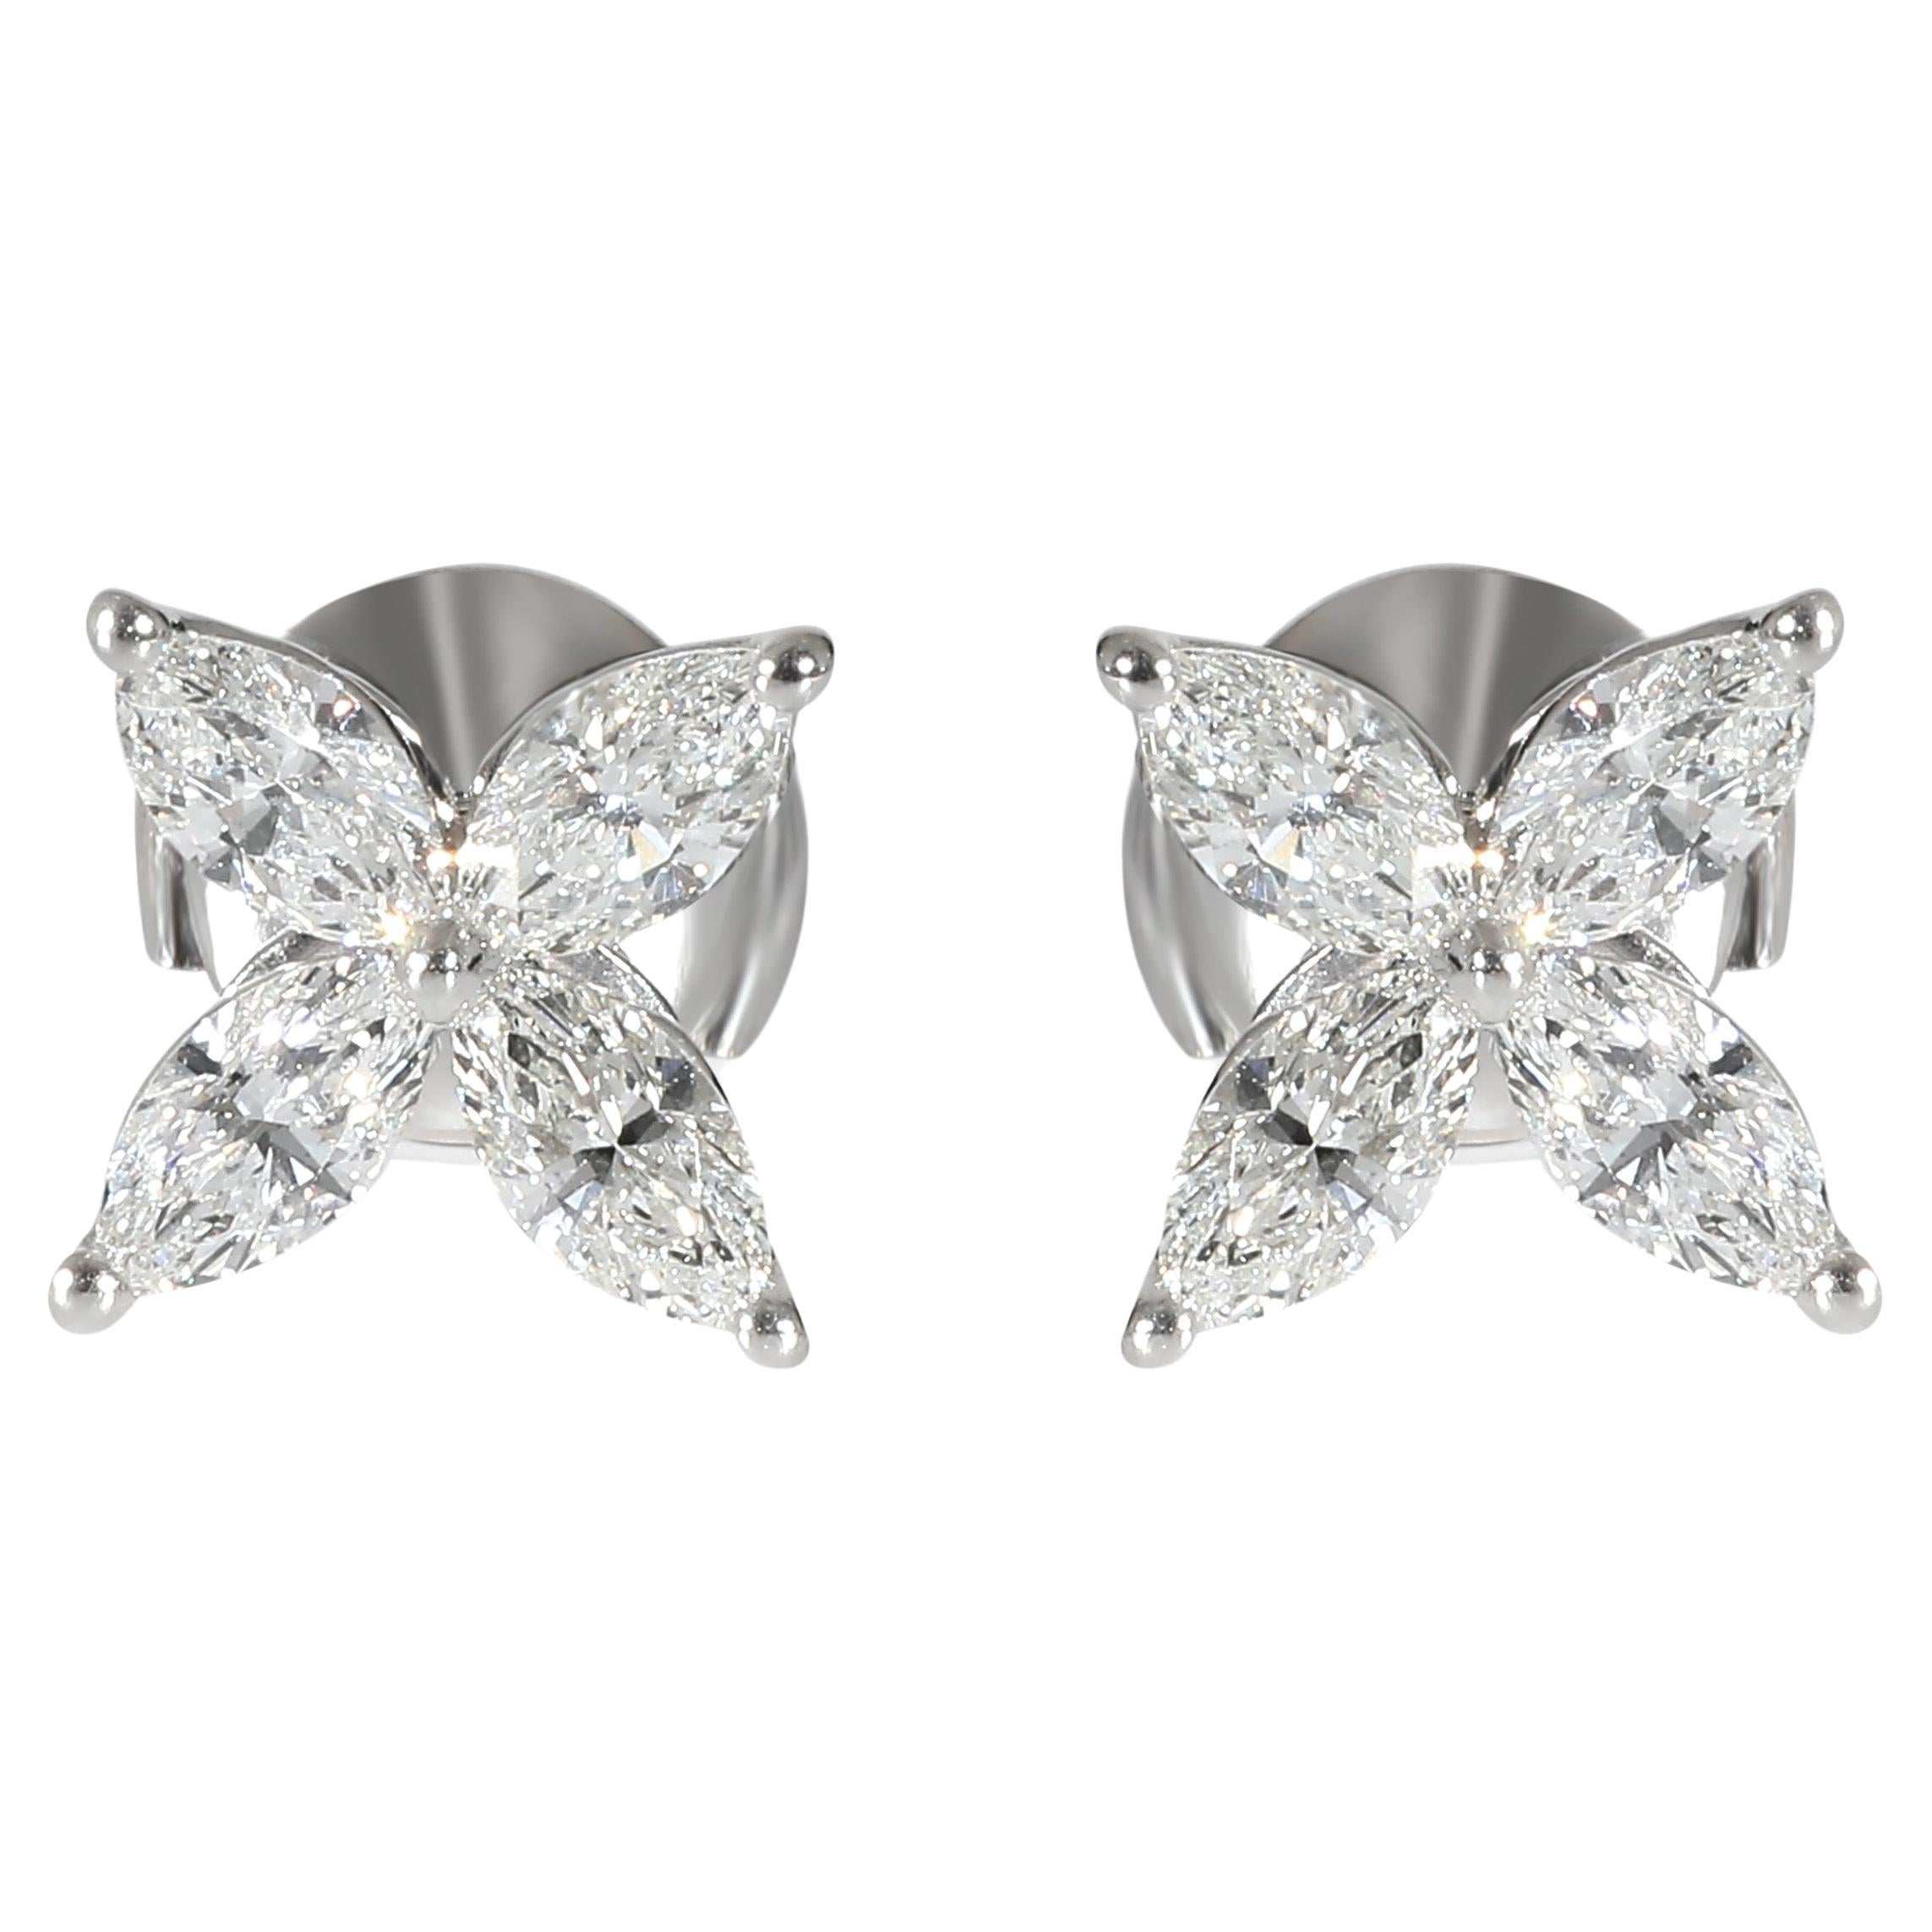 Tiffany & Co. Victoria Stud Earrings in Platinum 0.92 CTW